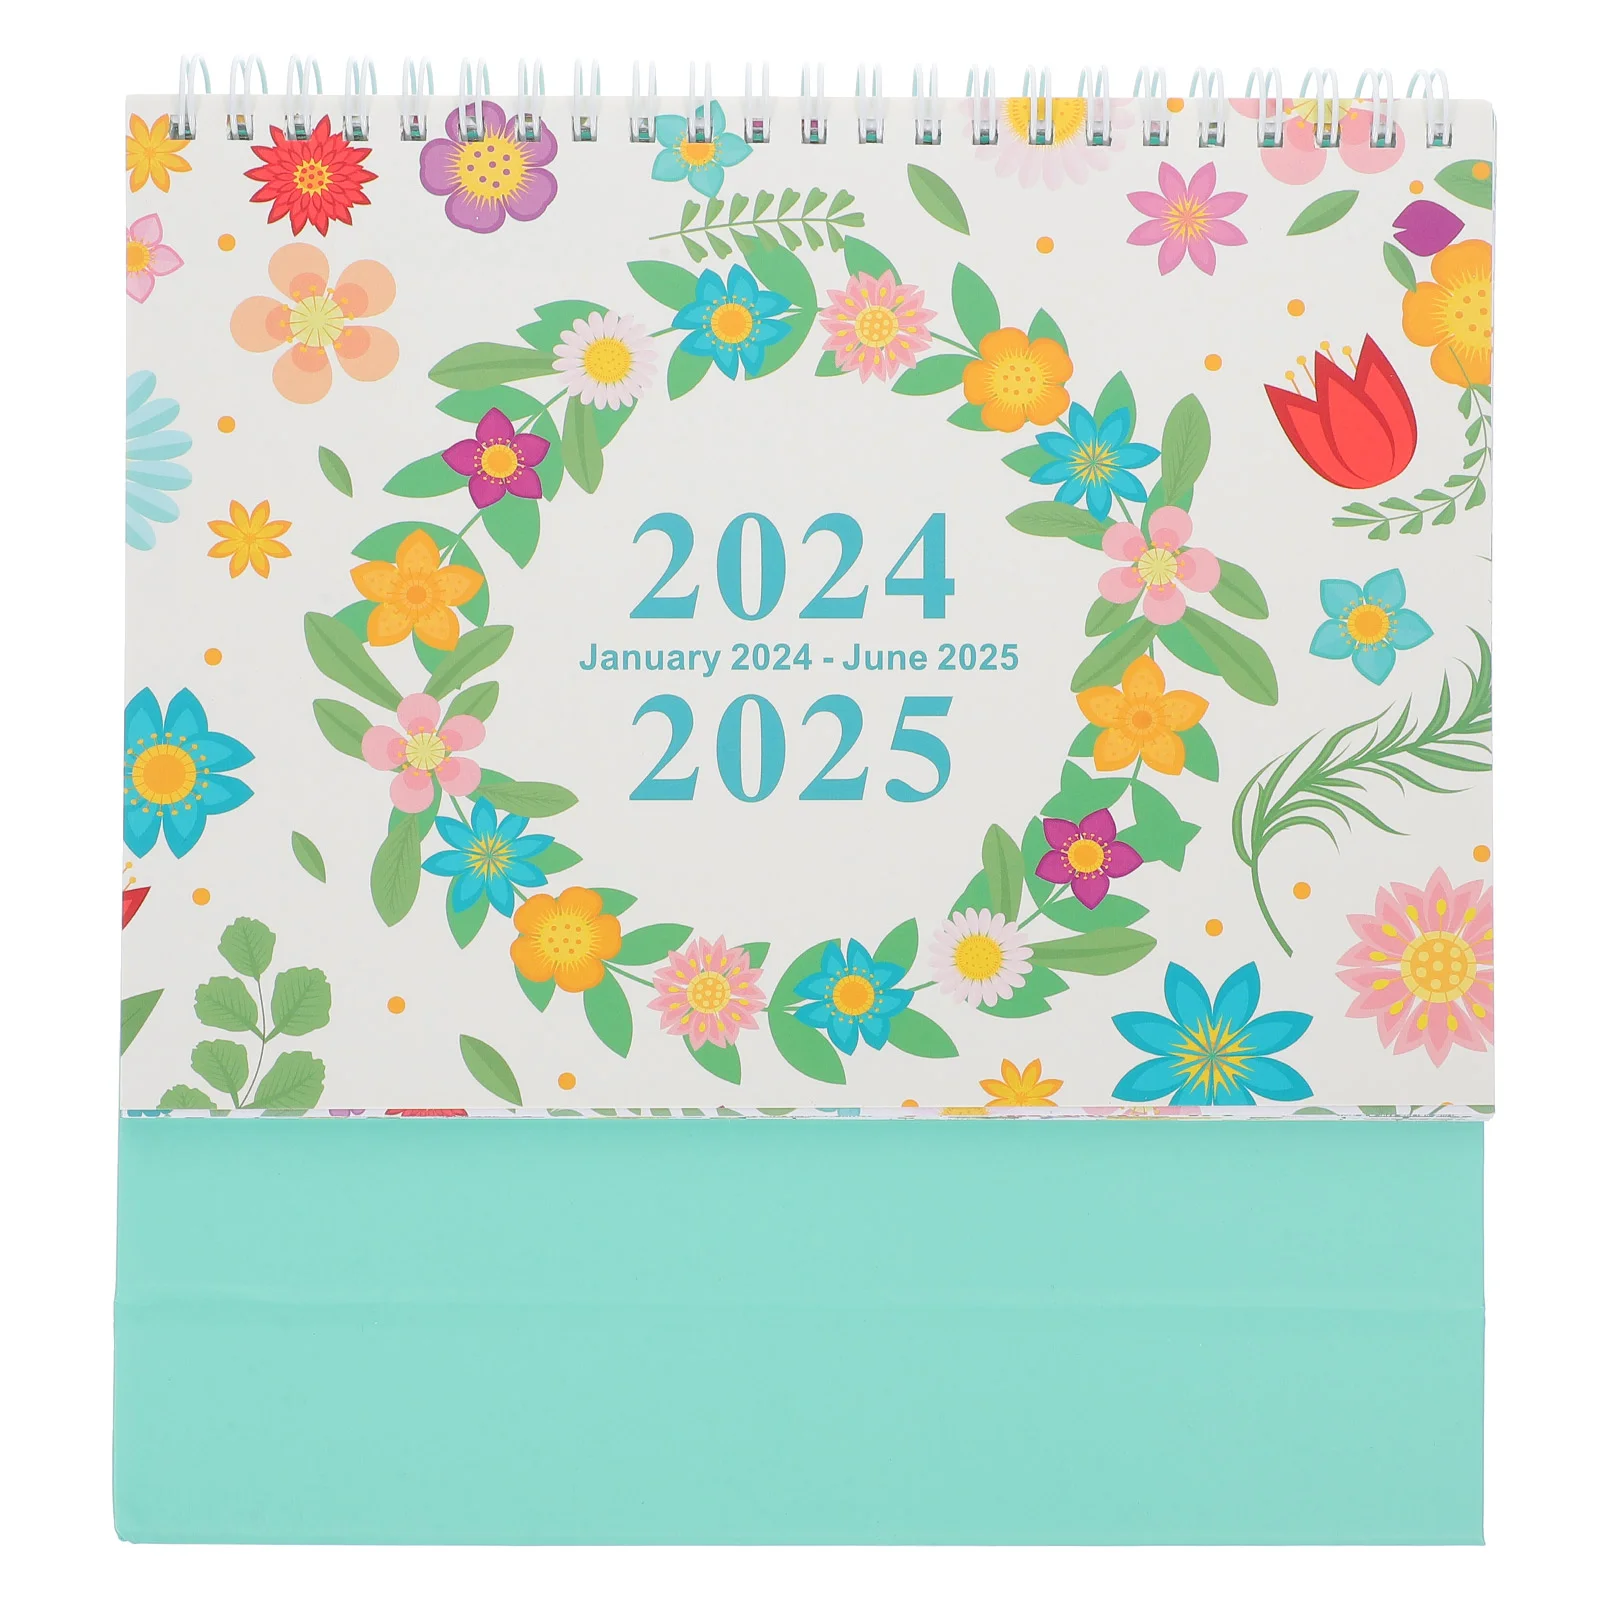 Decorative Desk Calendar Daily Use Monthly Calendar Office Standing Calendar Decor 2021 2022 desk calendar event stickers monthly planner runs from july 2021 december 2022 desk calendar for organizing